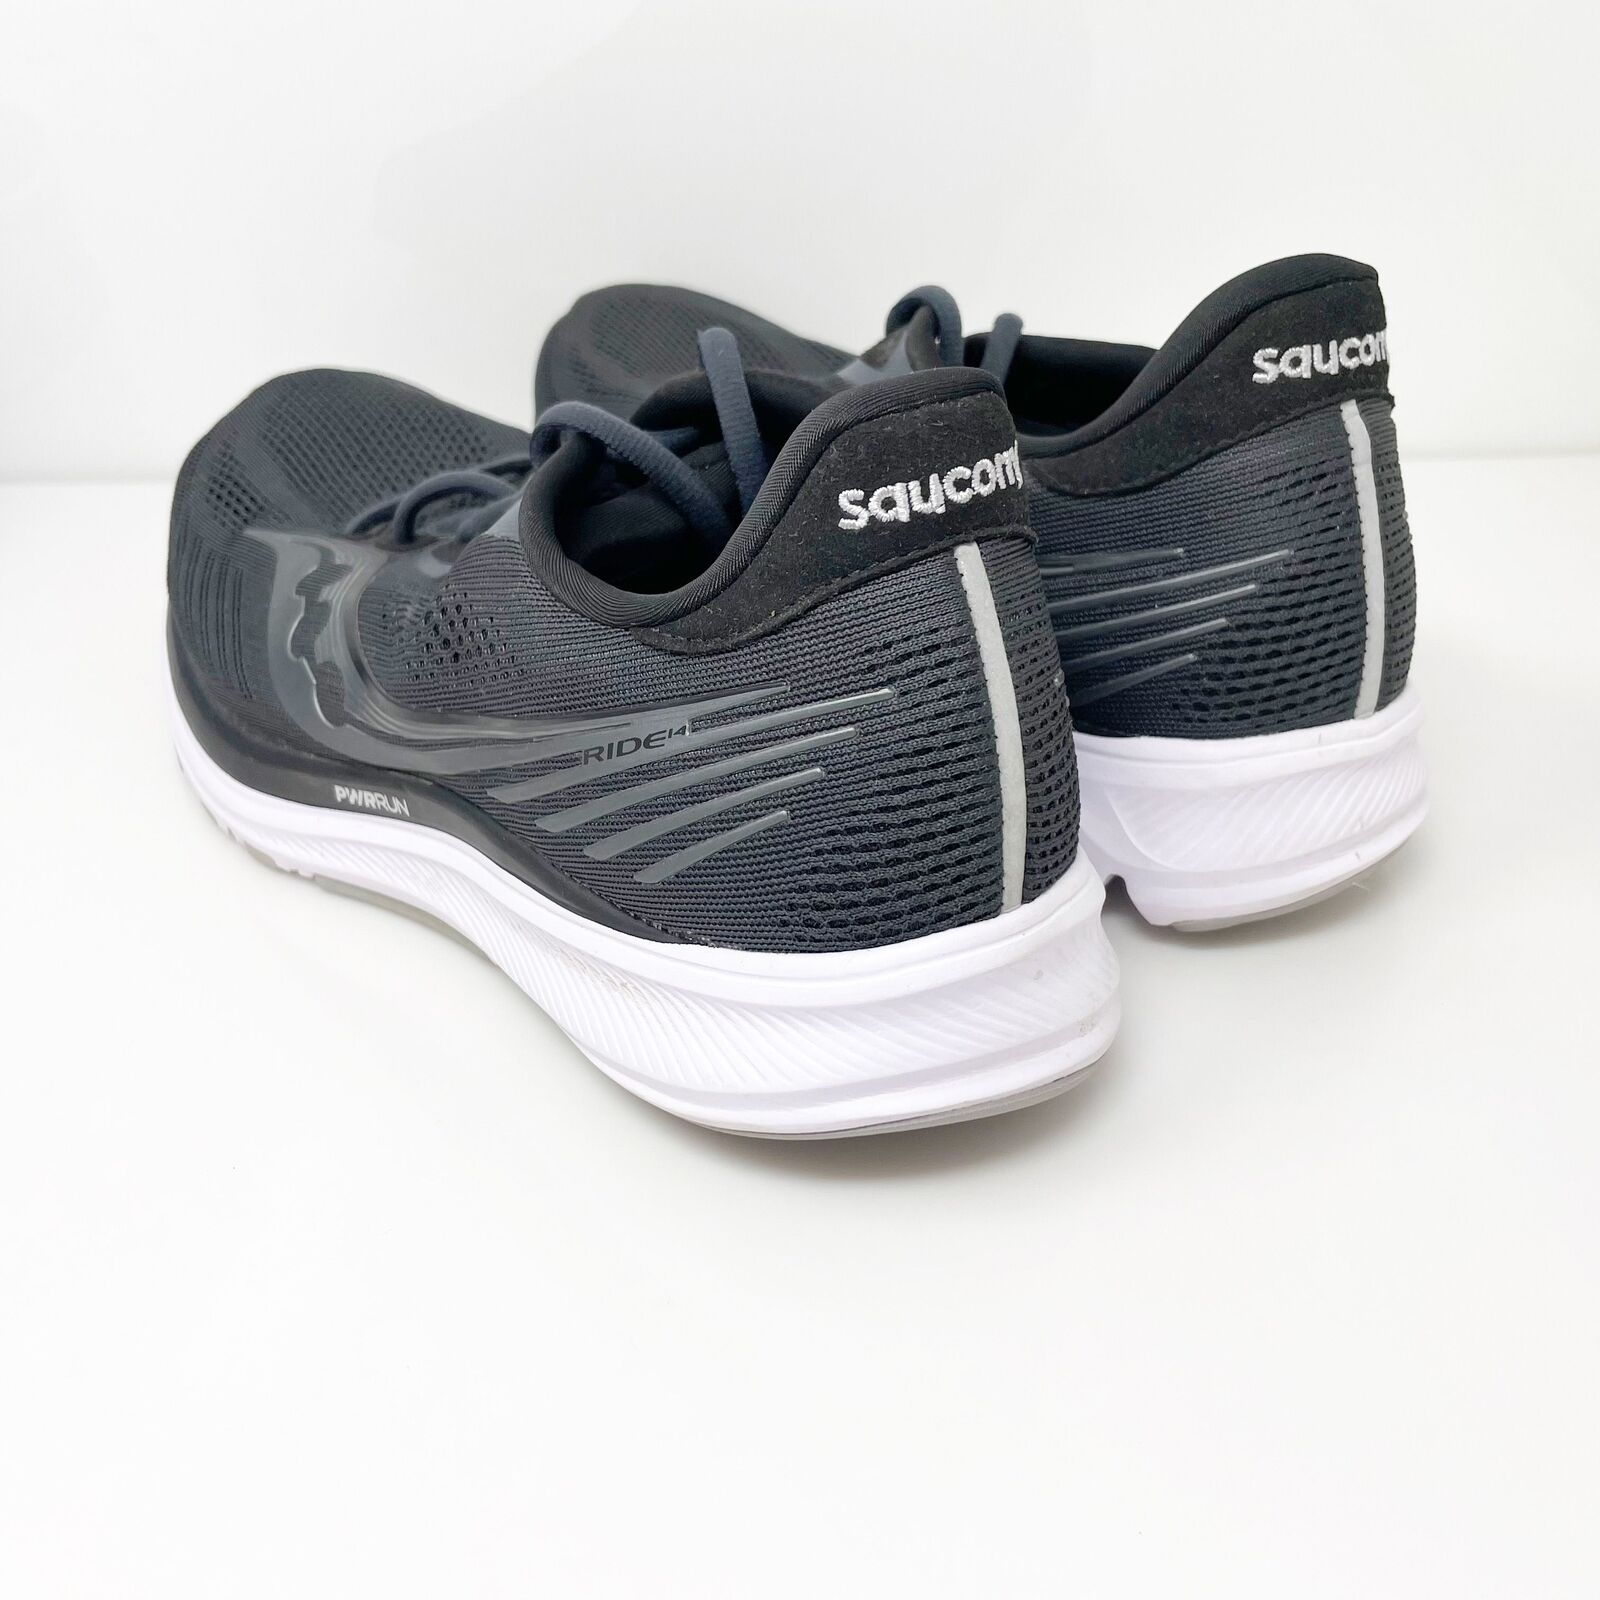 Saucony Mens Ride 14 S20650-45 Black Running Shoes Sneakers Size 10.5 ...